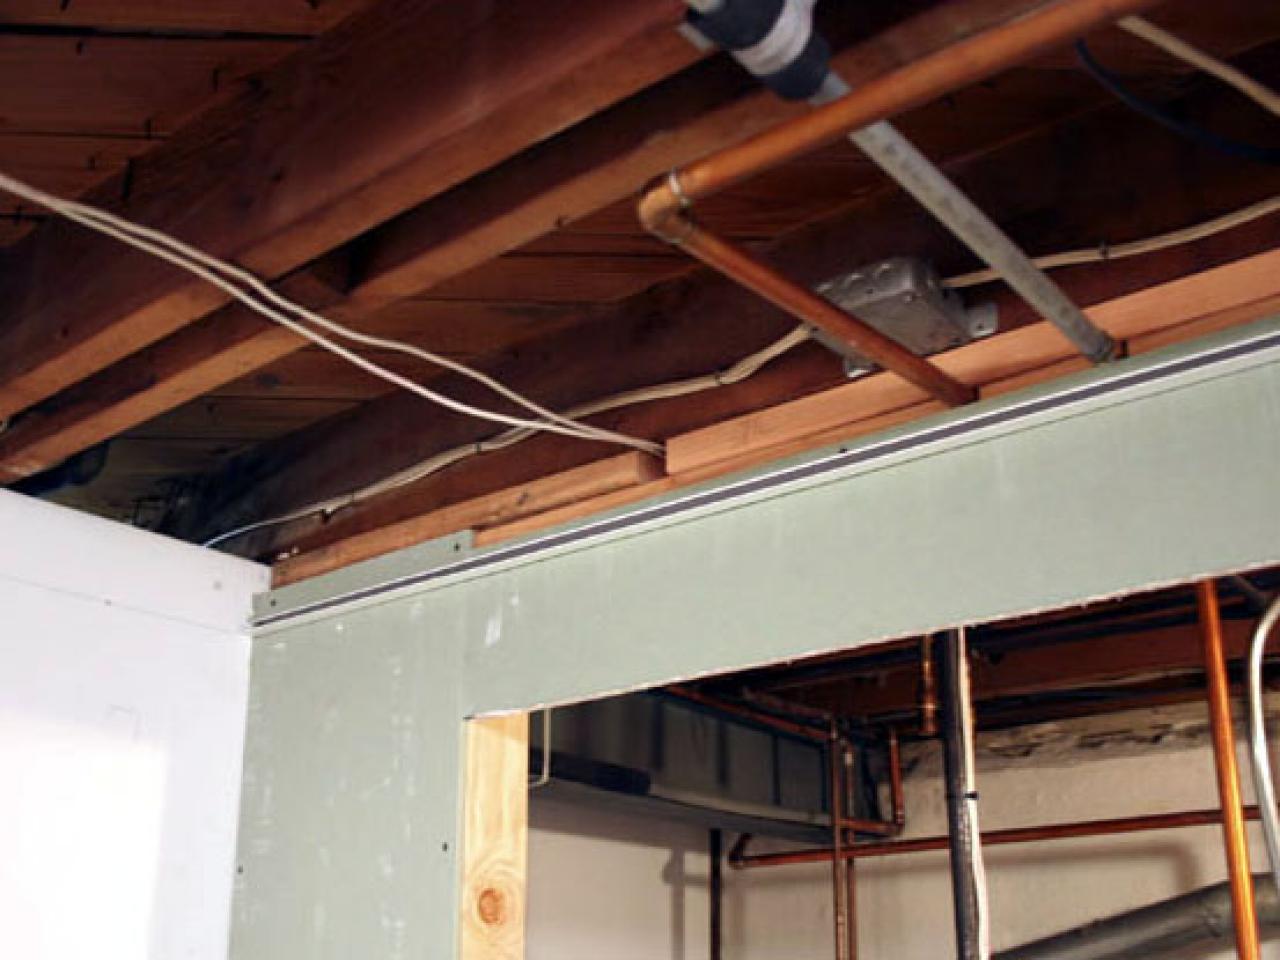 Installing A Drop Ceiling In Basement Laundry - How To Replace Ceiling Tiles In Basement